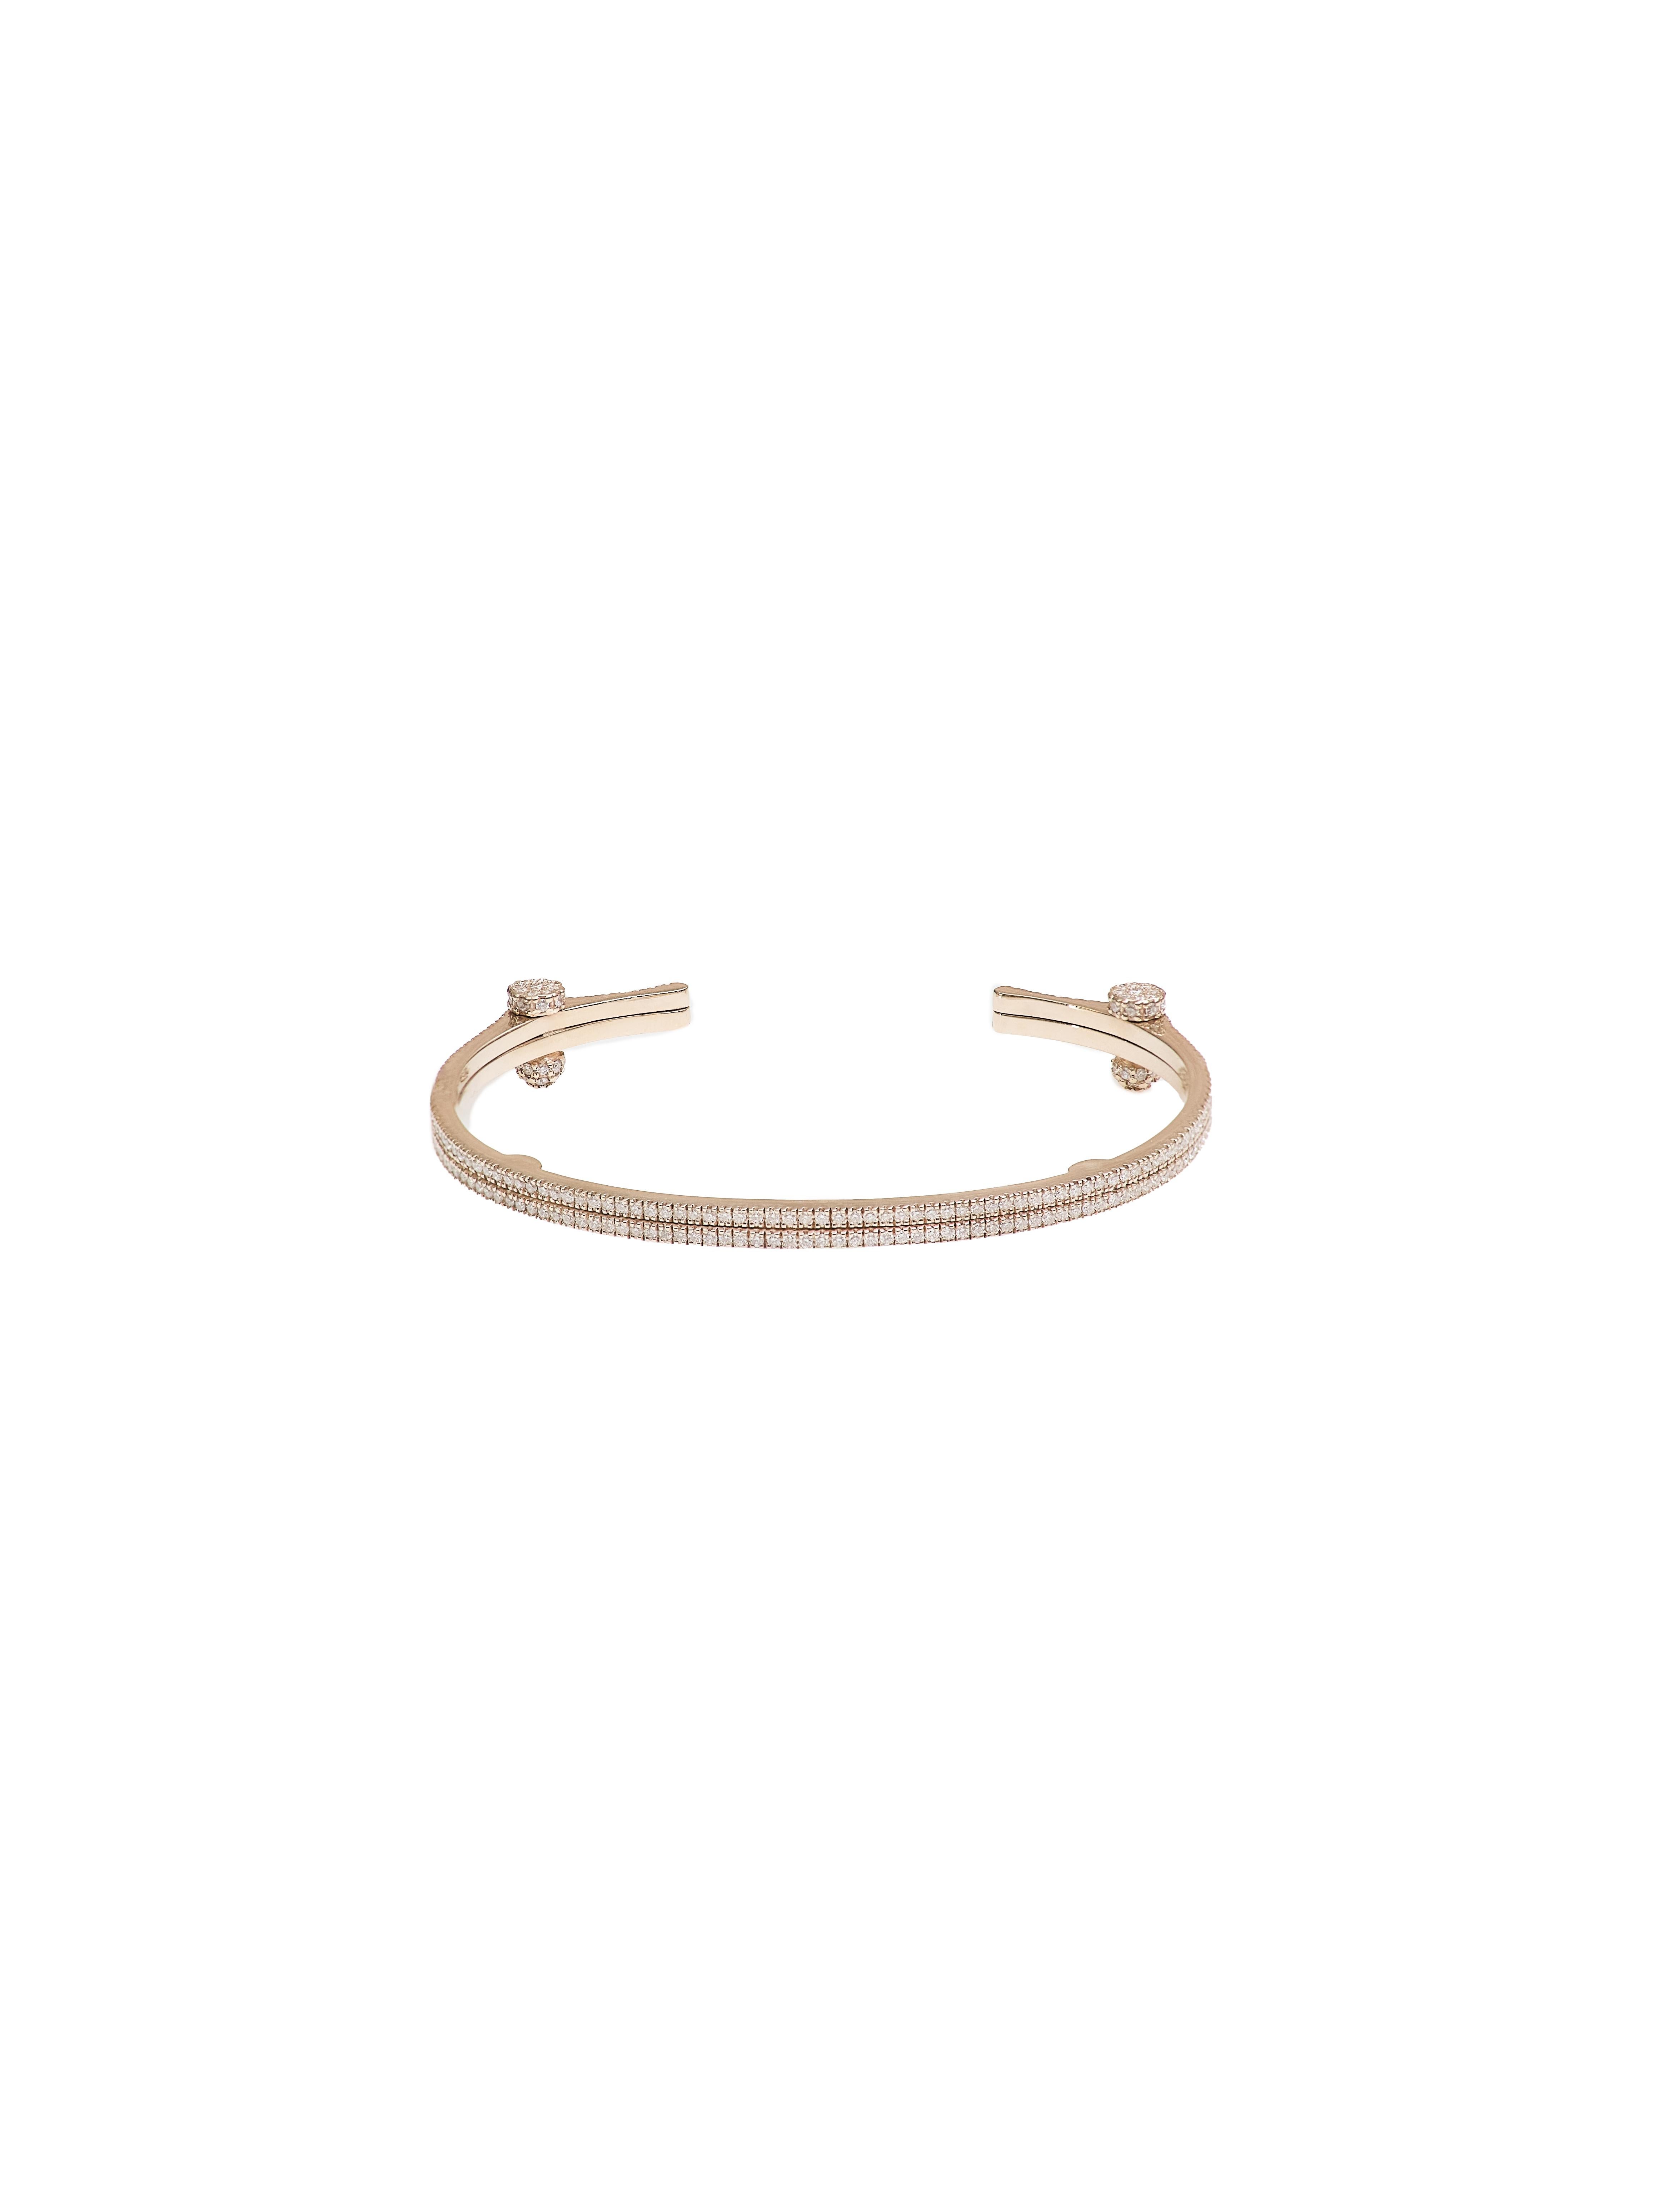 This bracelet from POLINA ELLIS' SYNDESIS collection consists of two full pave bands connected with full pave screws. 
Handcrafted in 18K raw white gold with 1,40ct white brilliant cut diamonds. The bracelet's perimeter is 15,5cm.